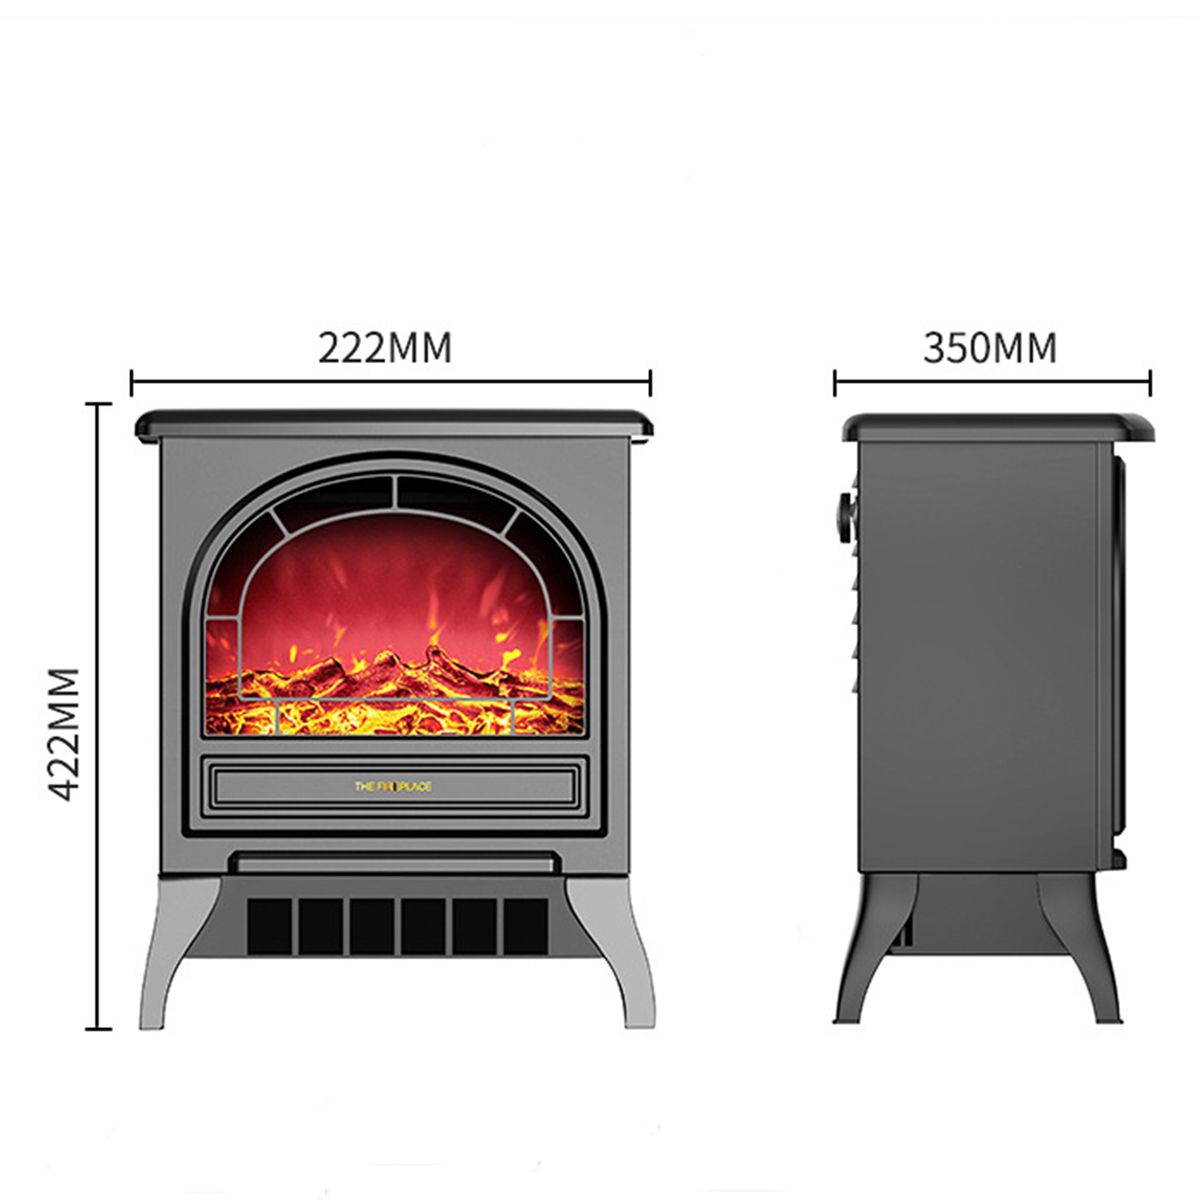 220V-1800W-3D-Simulation-Fire-Electric-Fireplace-Heater-Vertical-Household-Office-1600832